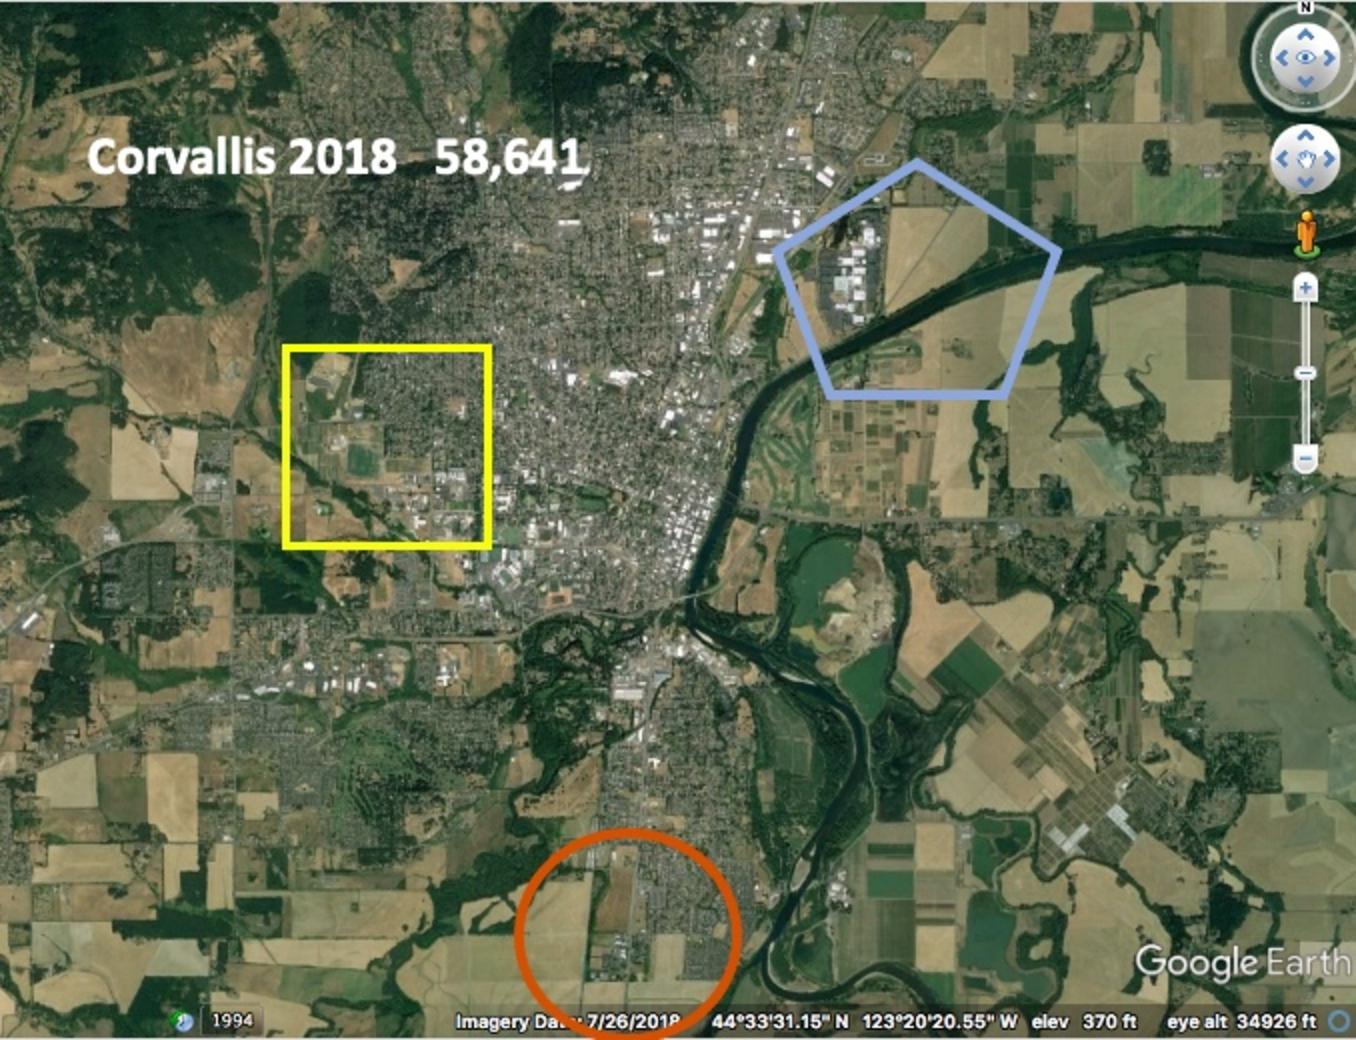 In 24 years as the Oregon college town of Corvallis, roughly comparable to Bozeman, grew in population, the pastoral nature of the land beyond its urban growth boundary remained largely intact. Image provided courtesy Robert Liberty and Google Earth.